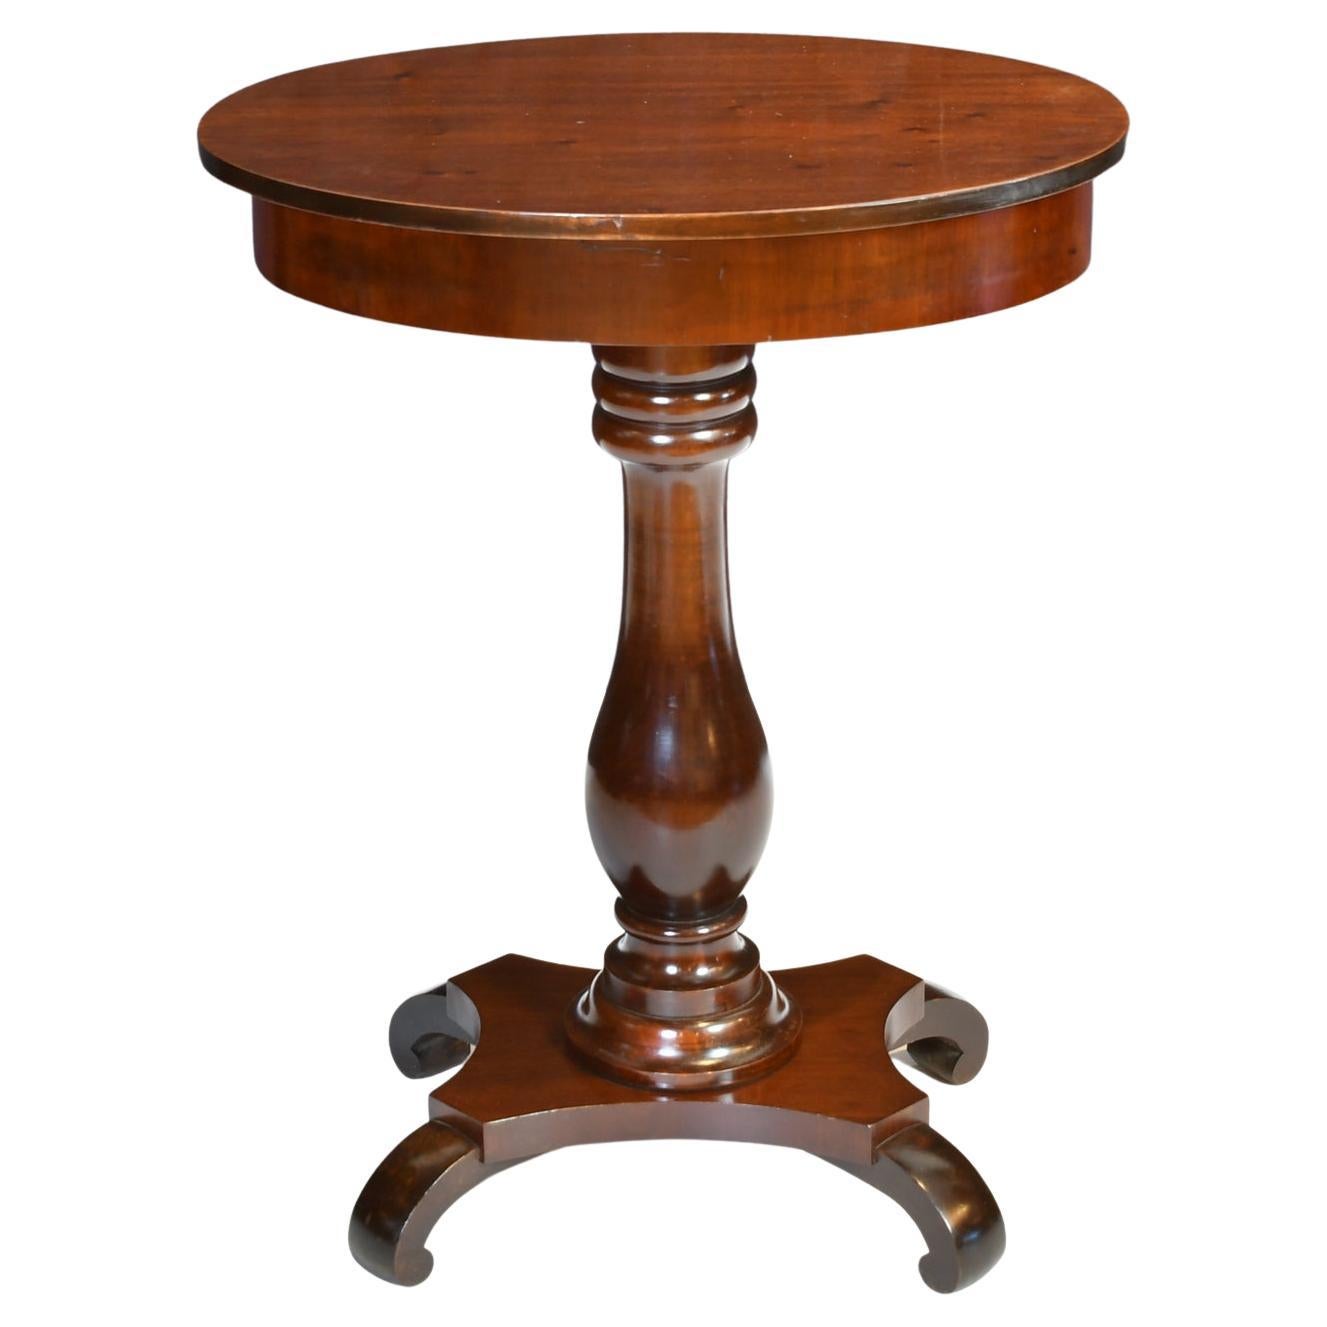 Early 20th Century Small Antique Oval Pedestal Table or Work Table in Dark-Stained Mahogany For Sale